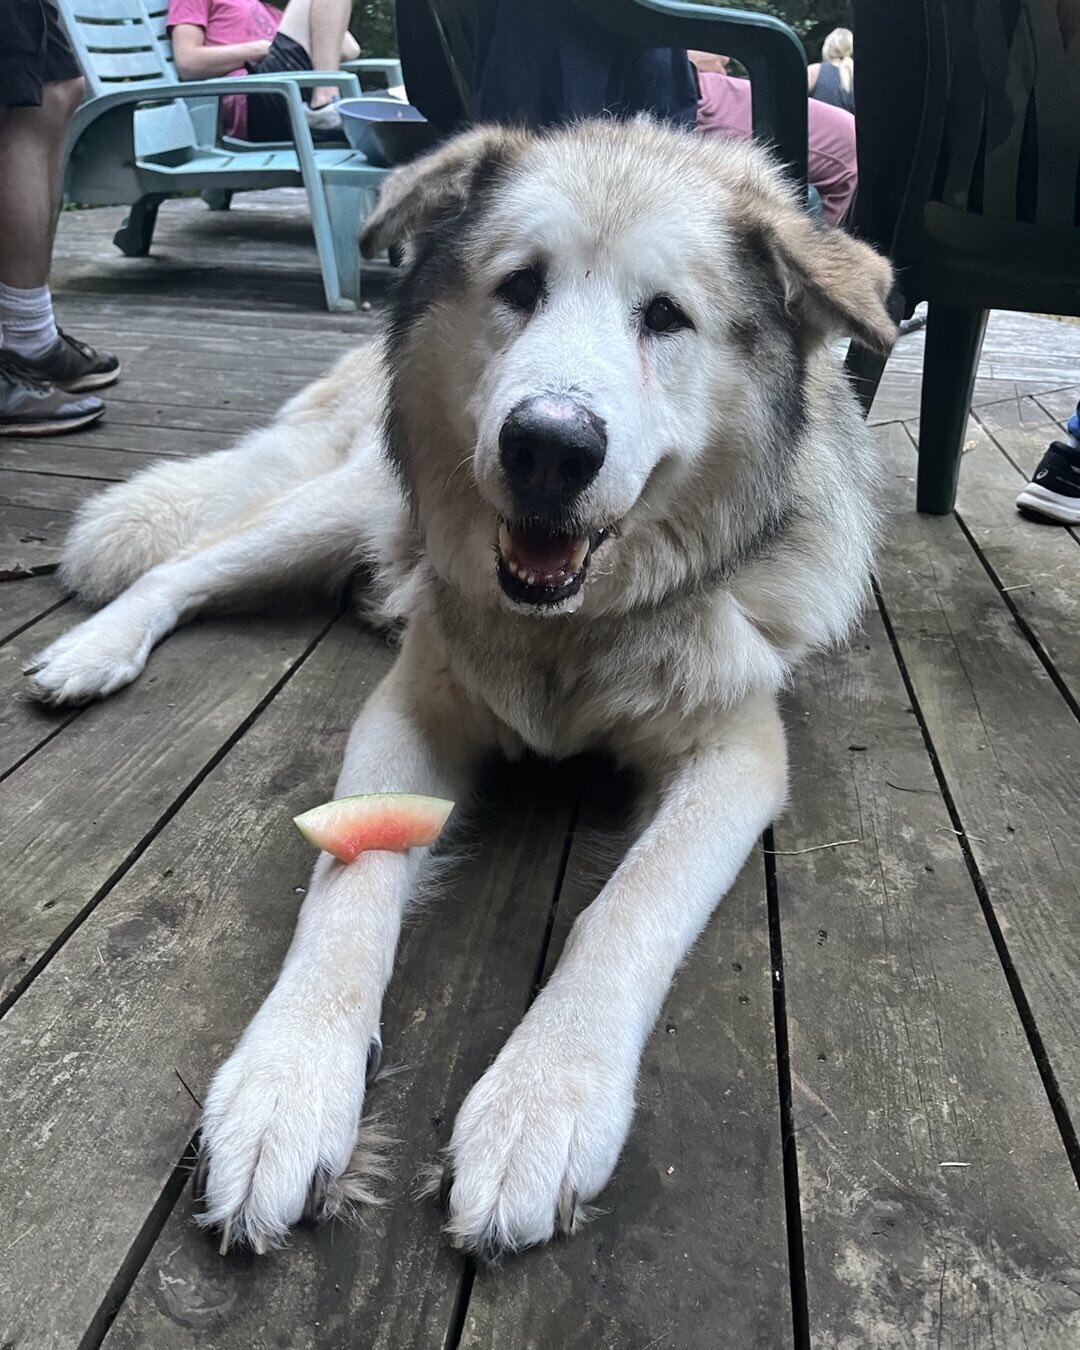 Our giant Alaskan Malamute having a little watermelon on a warm summer day!
#offgridlife #dogsofinstagram #thenetbeneathus #literarylife #writinglife